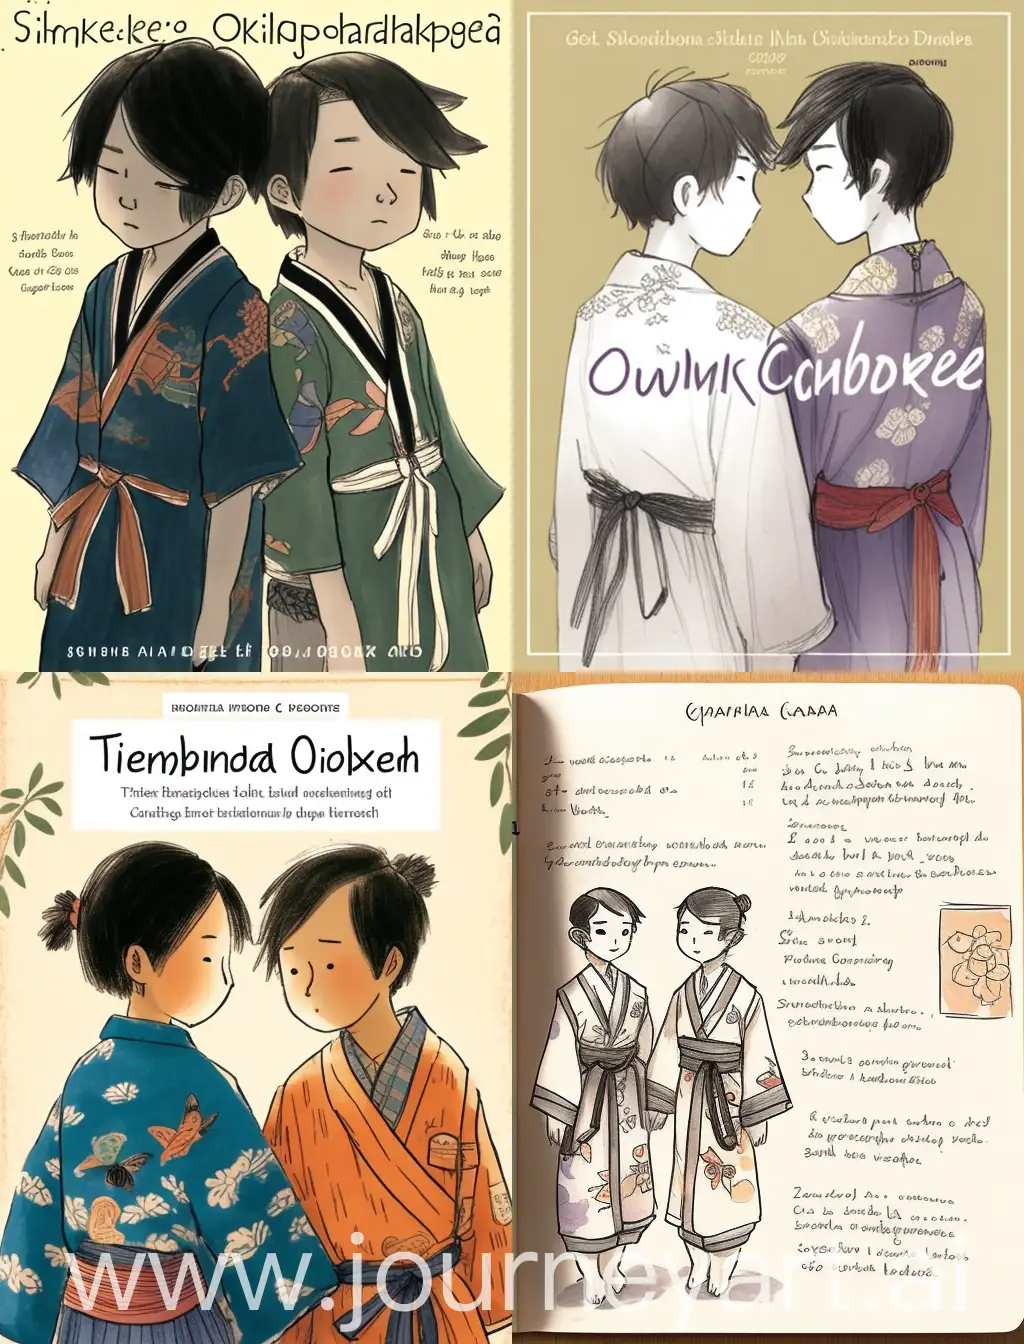 Two 15-year-old Japanese boyfriends dressed in old kimonos, Japanese style, with their arms affectionately around each other. Dark hair, Japan has a rich tradition of storytelling and whimsy. Create a collaborative story that incorporates elements of these artistic styles: the turbulent past and tenacious spirit of the Japanese people, children's preschool drawings, pencil scribbles, the pure, free touch of hand-drawing, and the hazy, rustic backdrops of rural Japan.